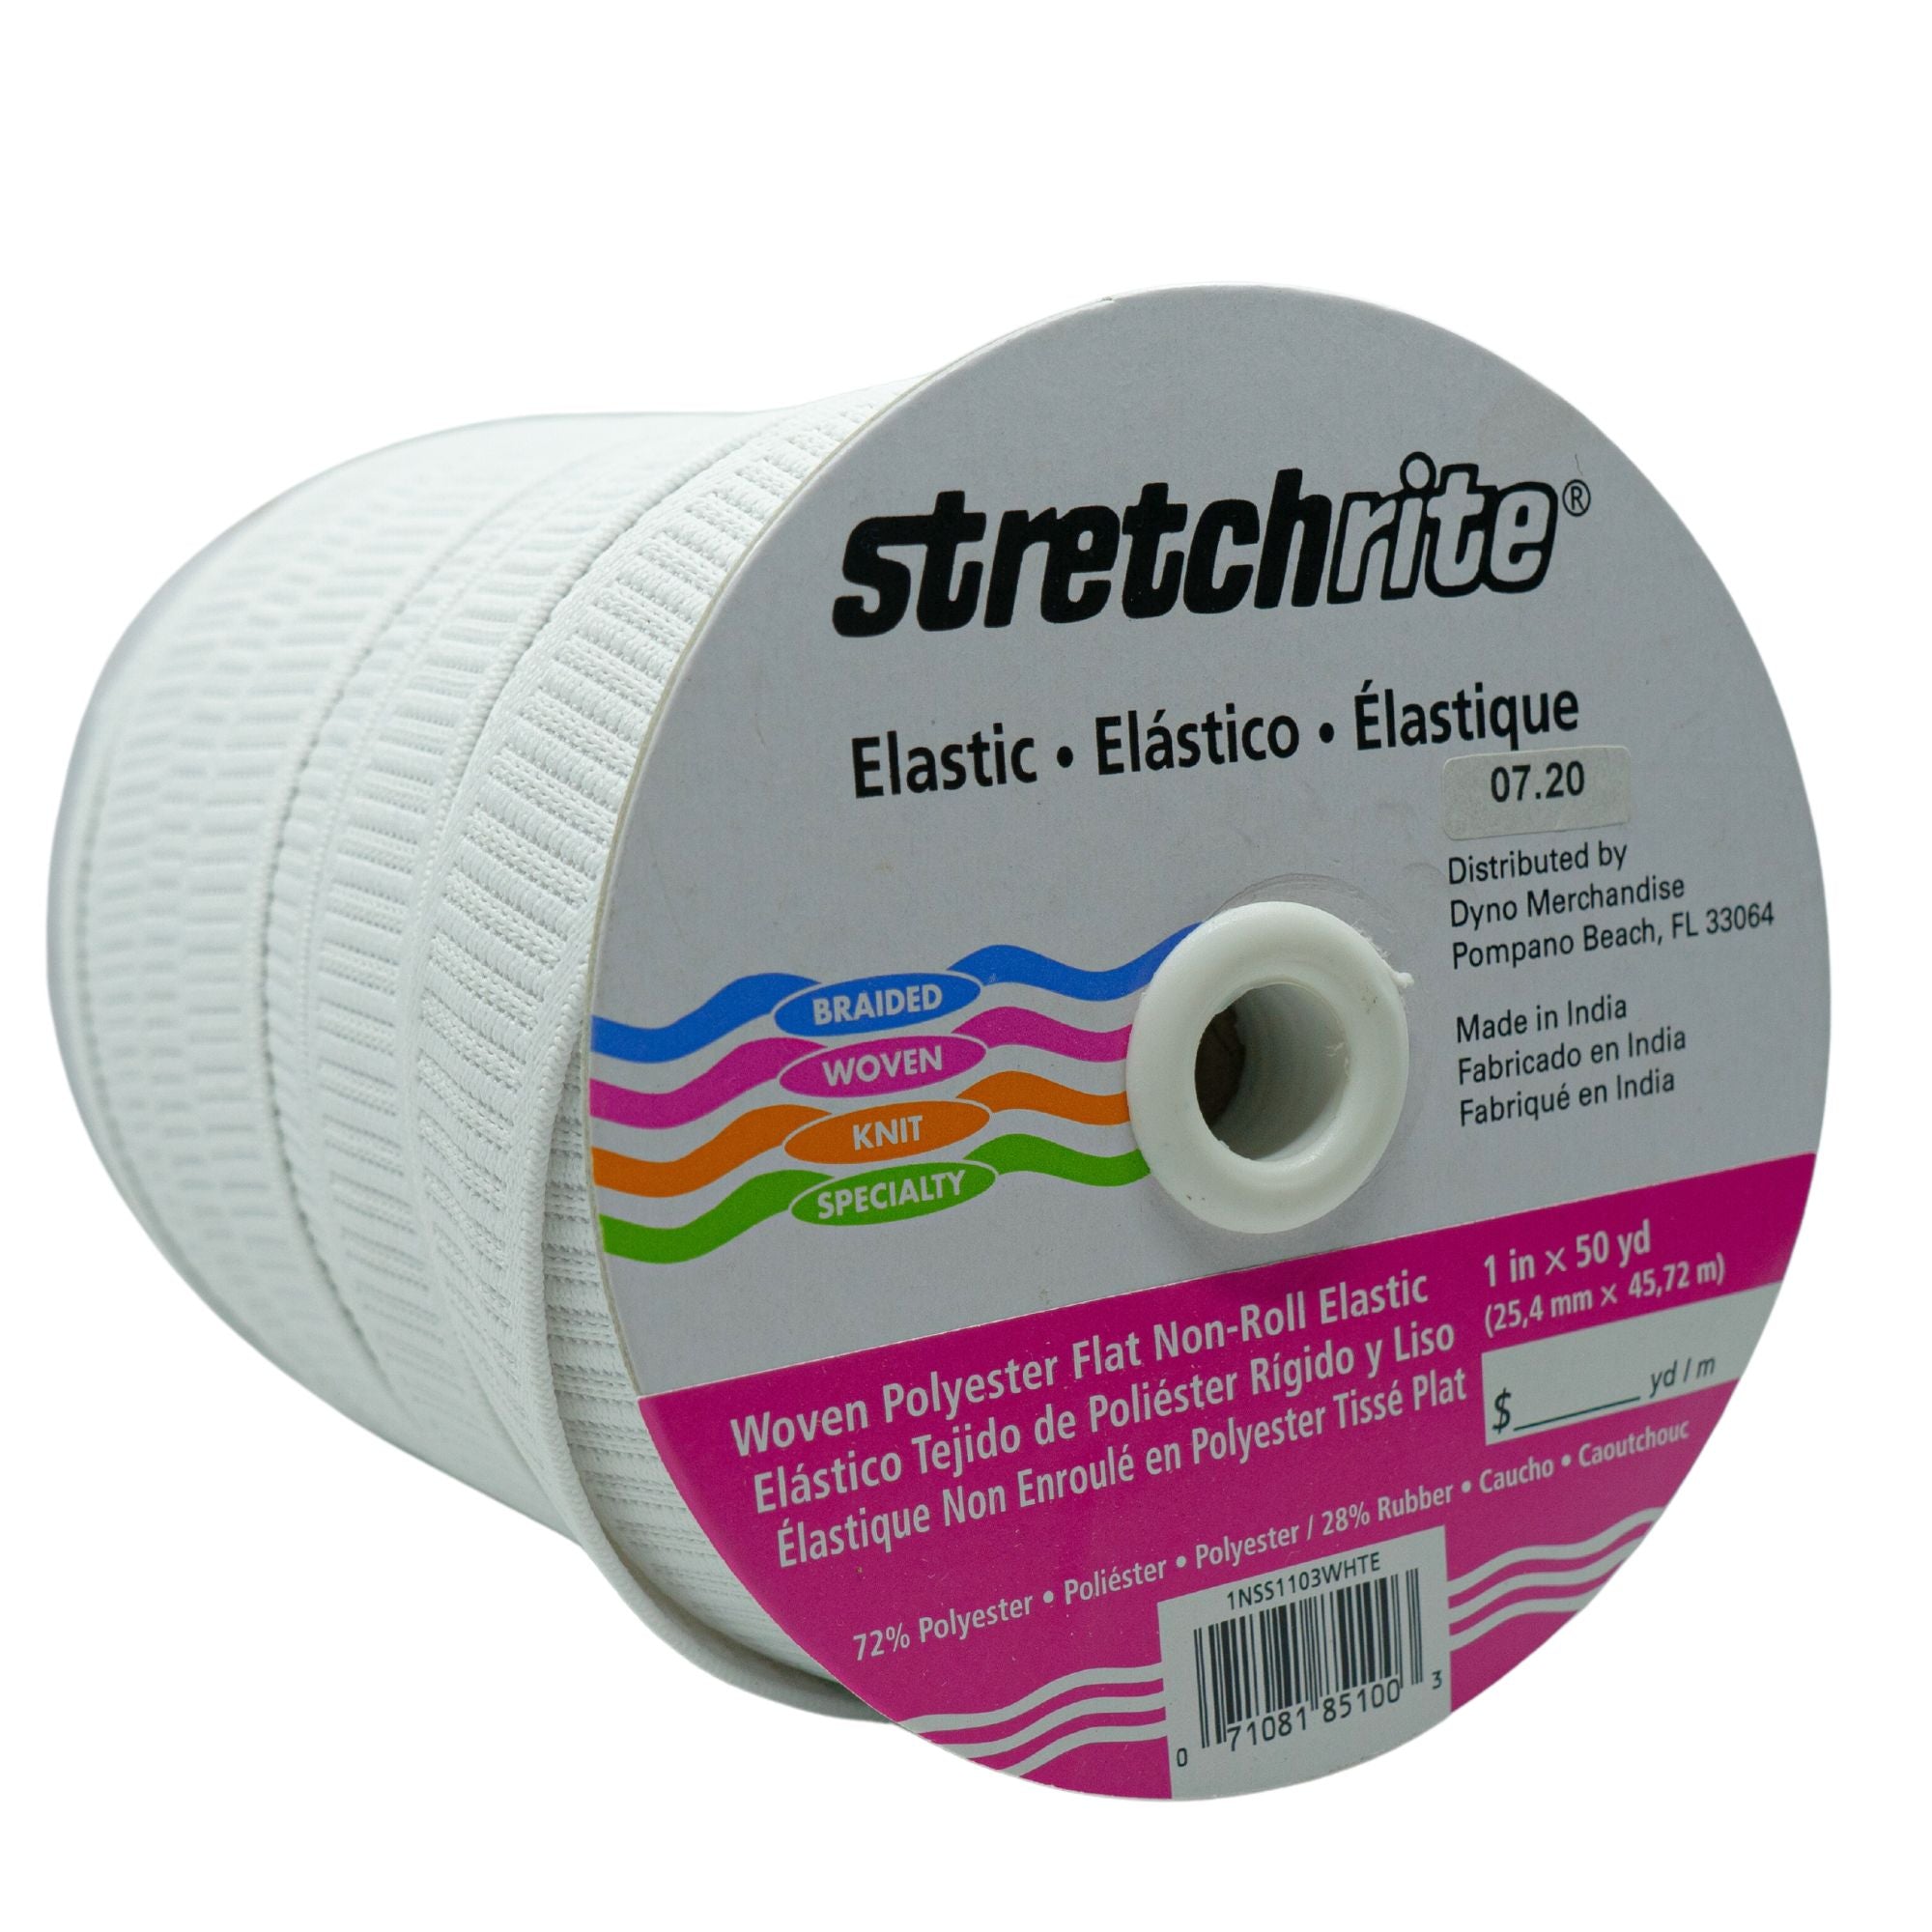 1/4 Sewing Elastic : Braided High Quality Non-Roll Chlorine